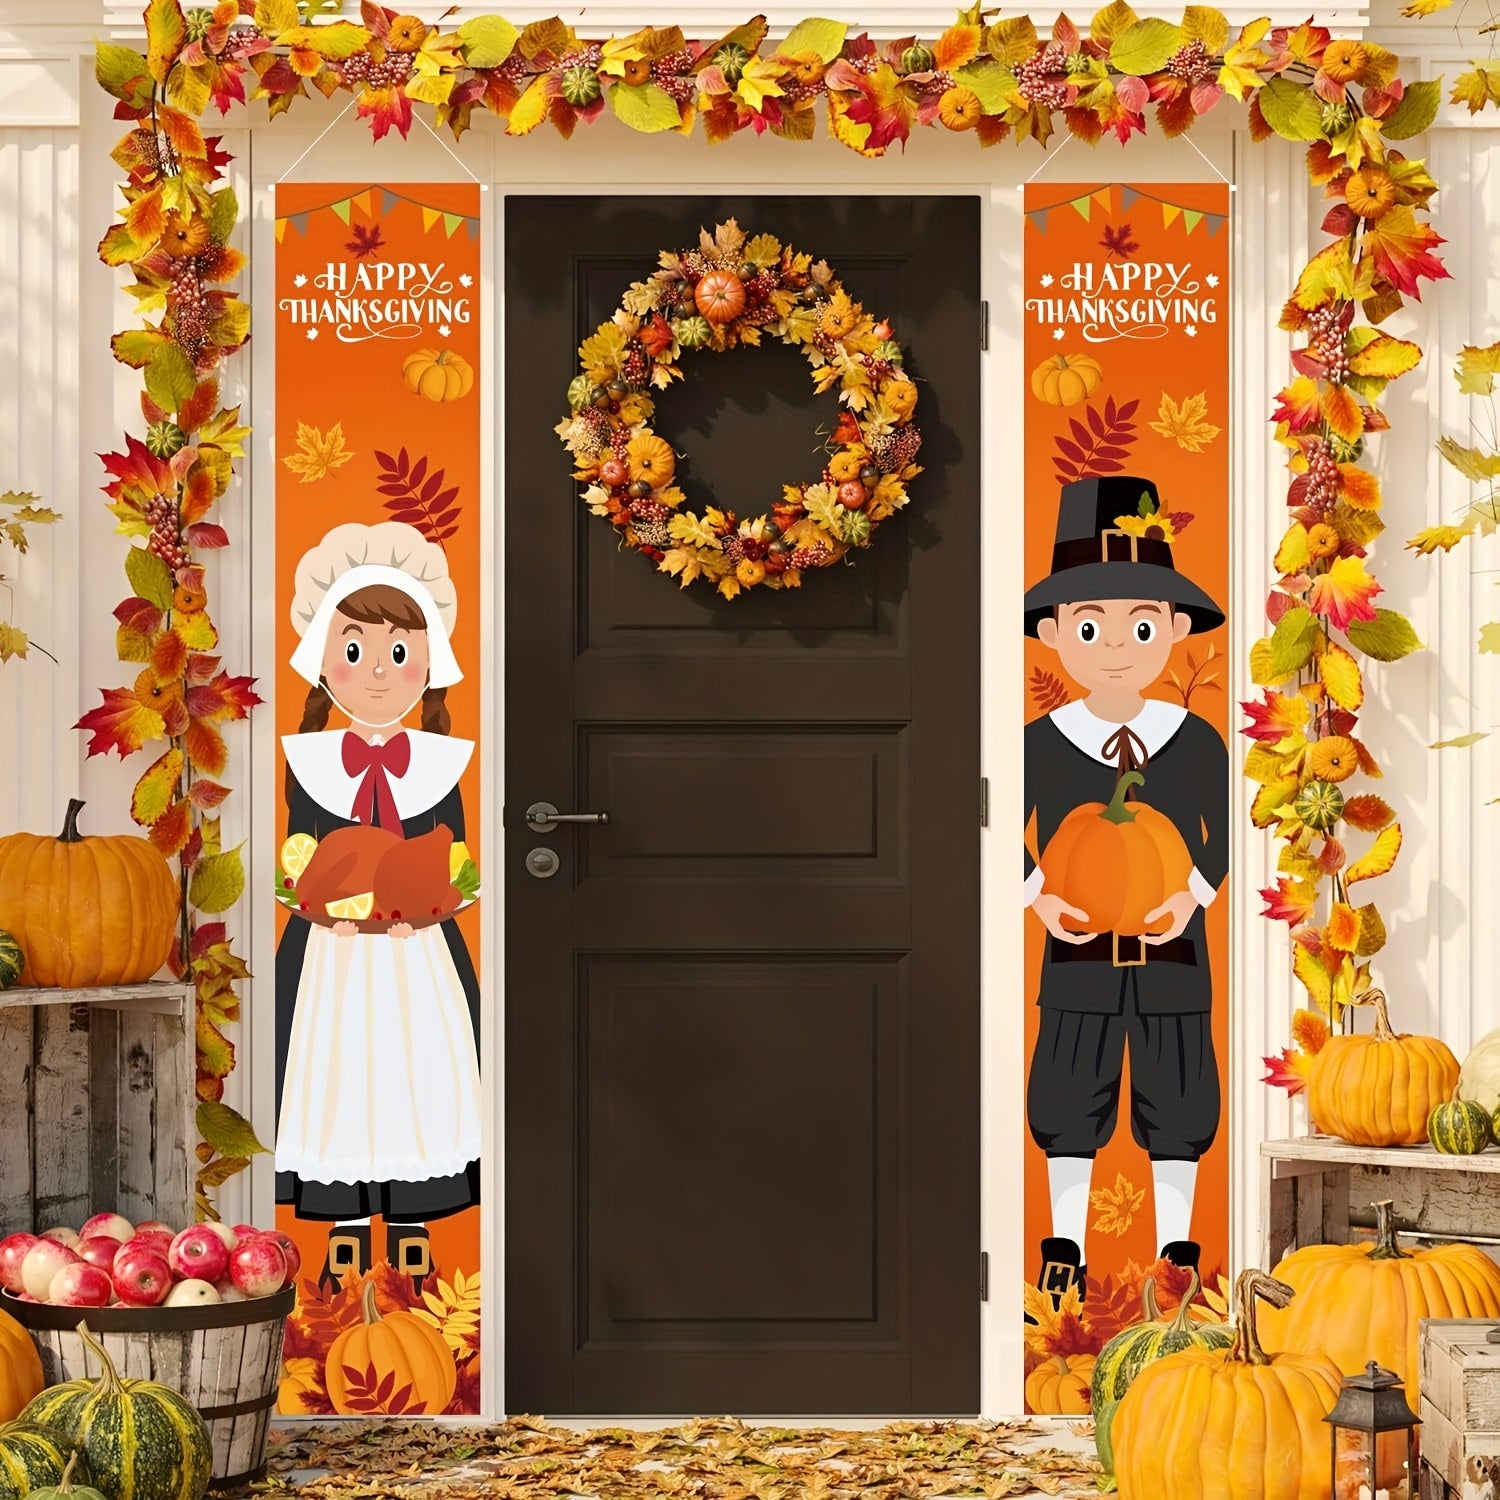 2 Pcs Thanksgiving Sign Fall Harvest Banner for Indoor Outdoor Home Party Decorations